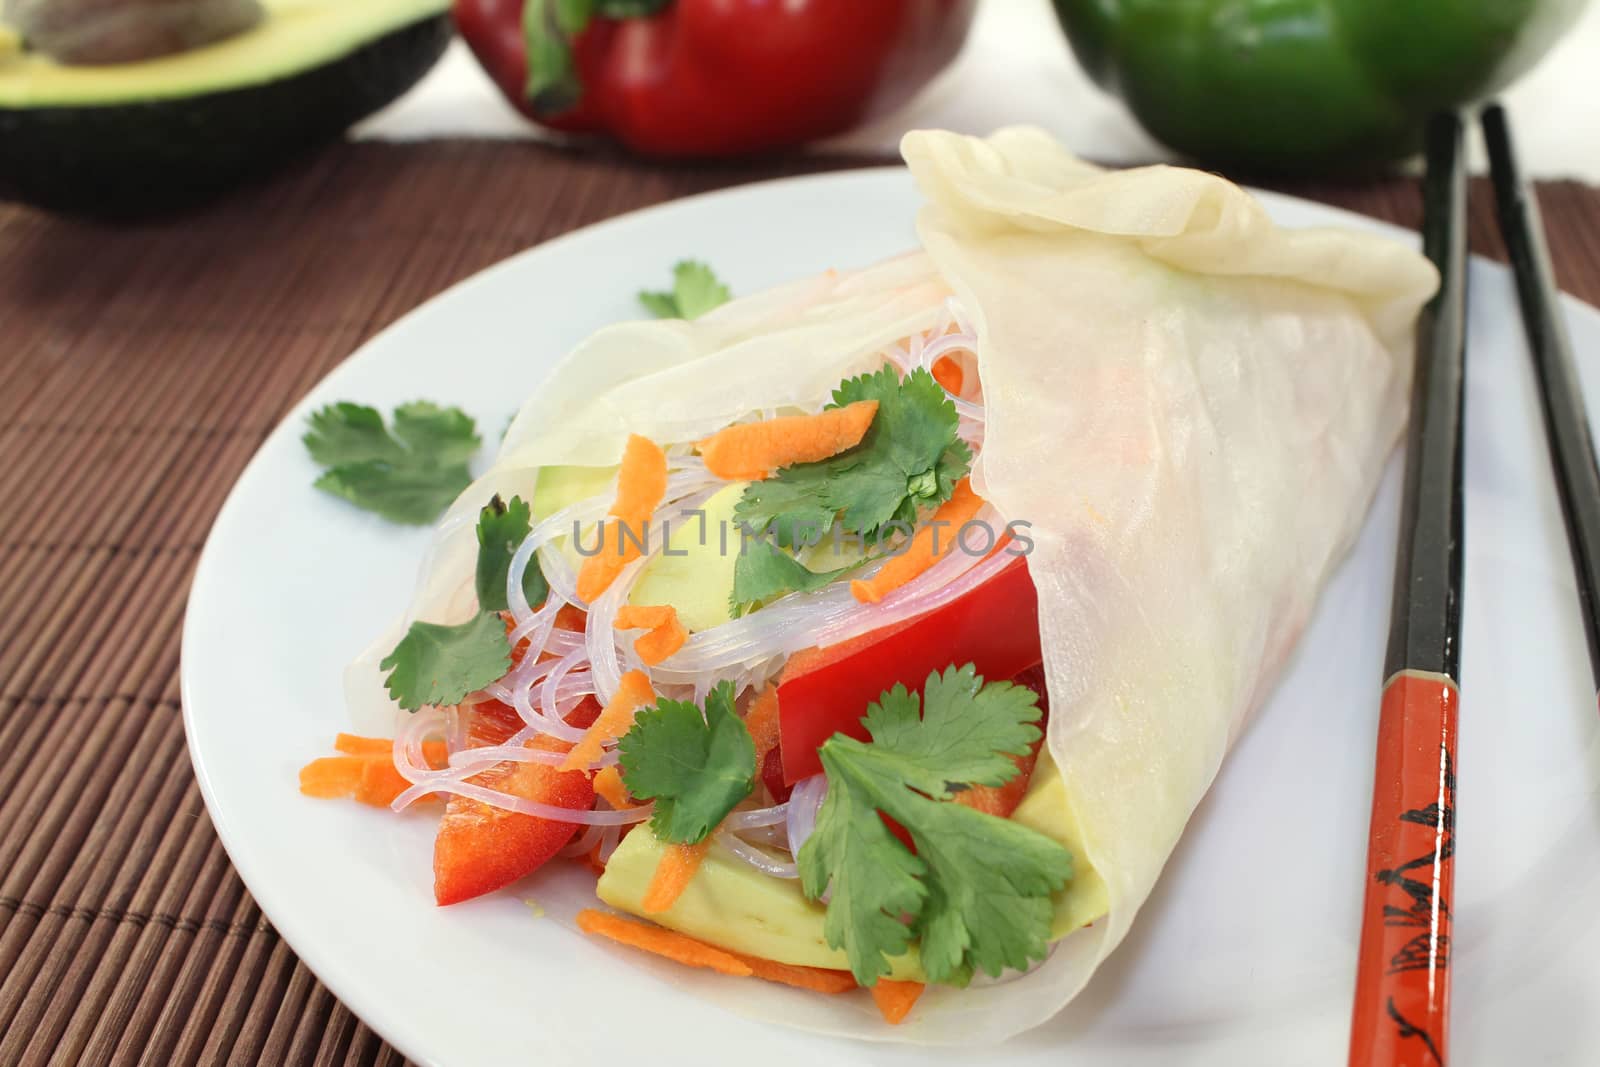 Rice paper stuffed with glass noodles, carrots, peppers and cilantro